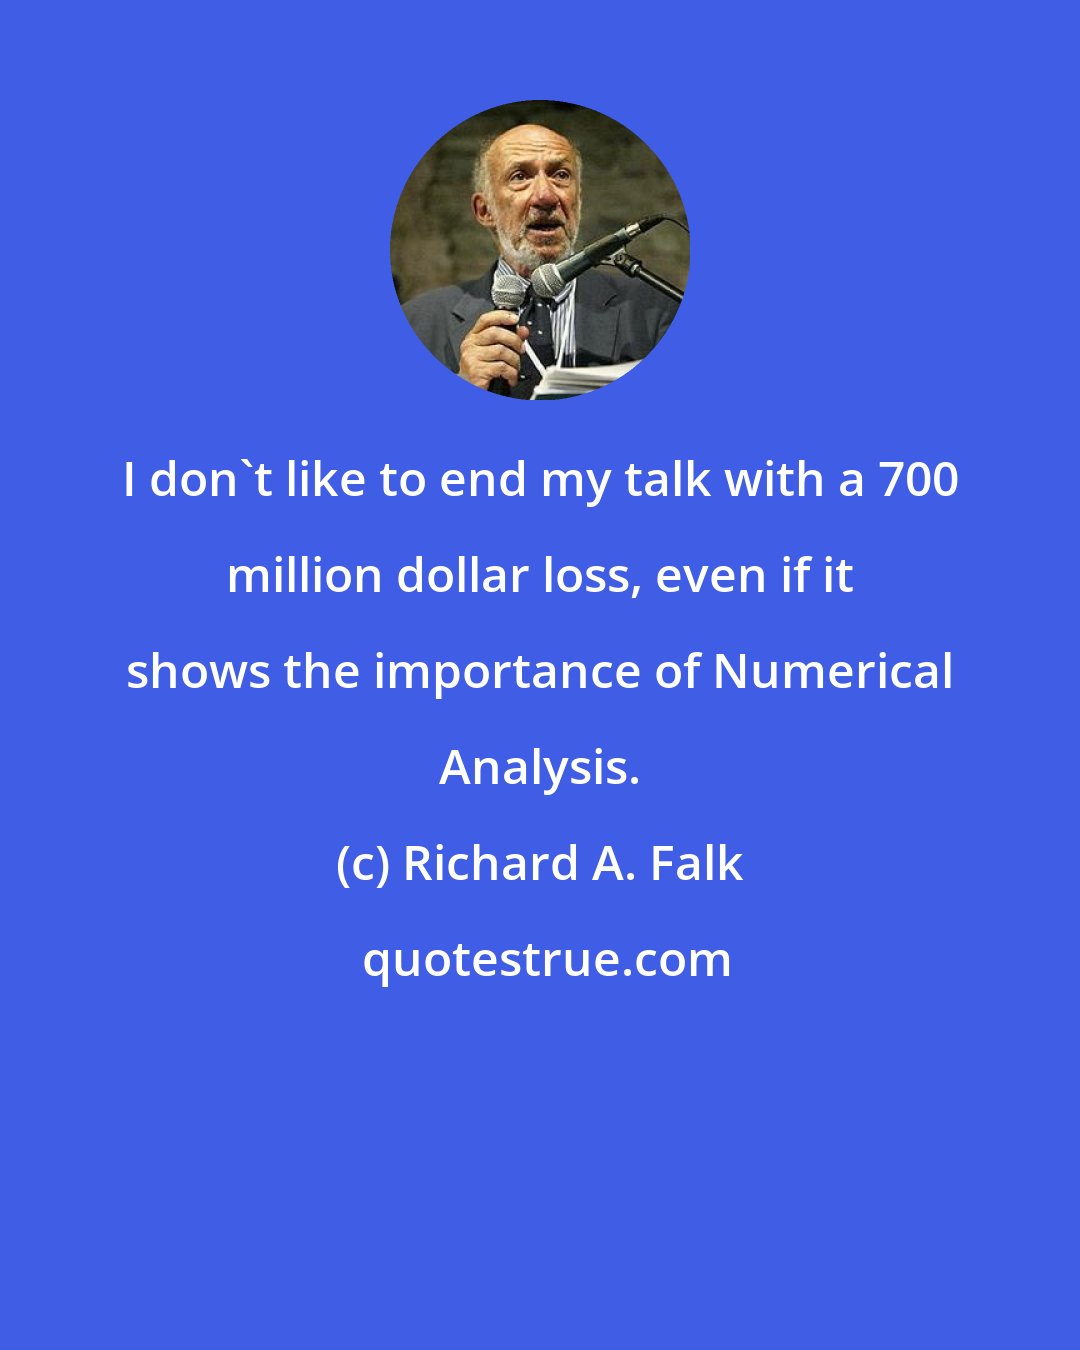 Richard A. Falk: I don't like to end my talk with a 700 million dollar loss, even if it shows the importance of Numerical Analysis.